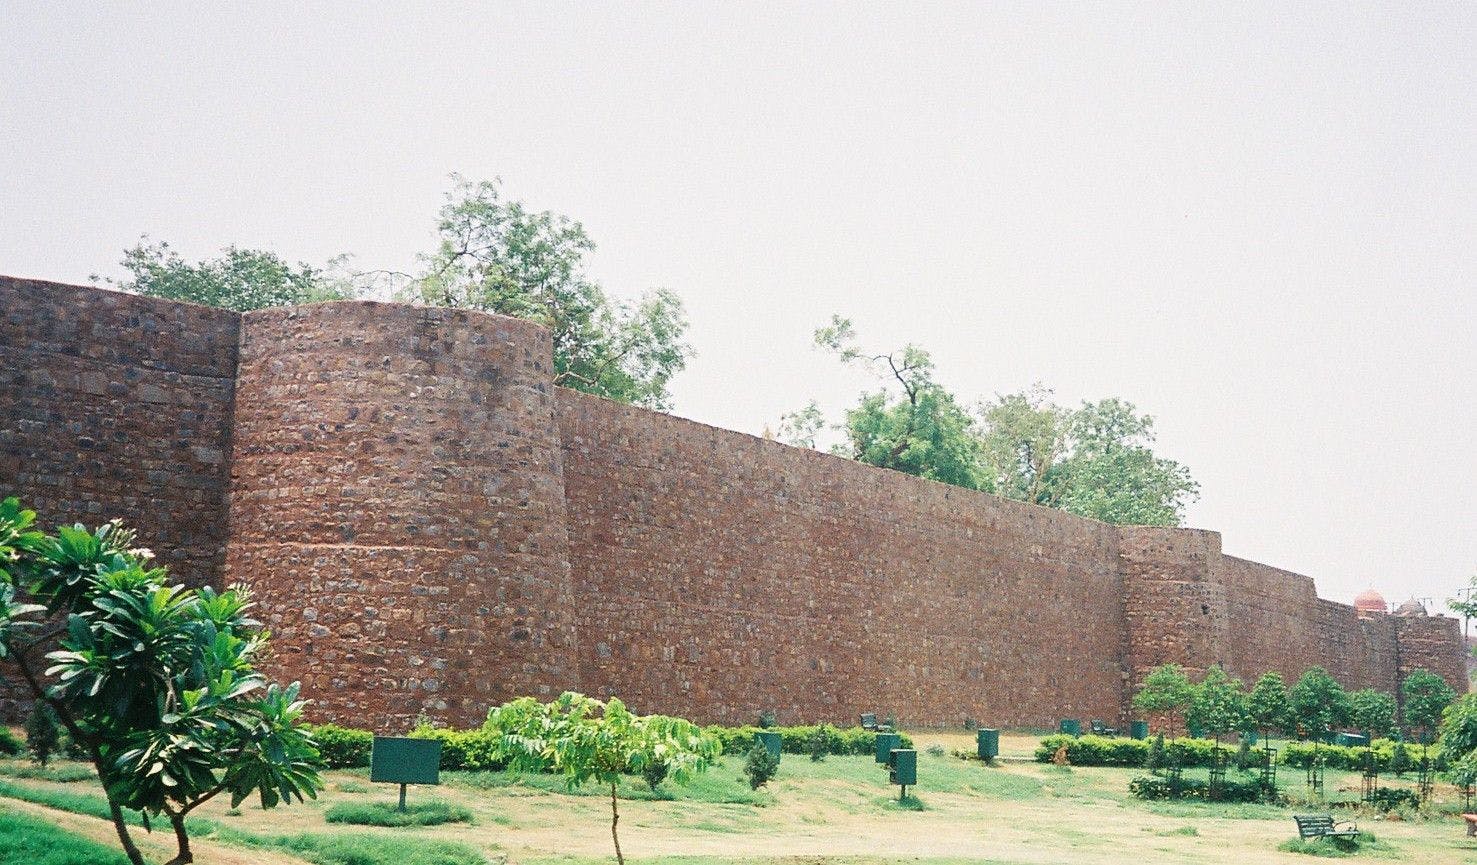 A view of the Salimgarh Fort with its bastions